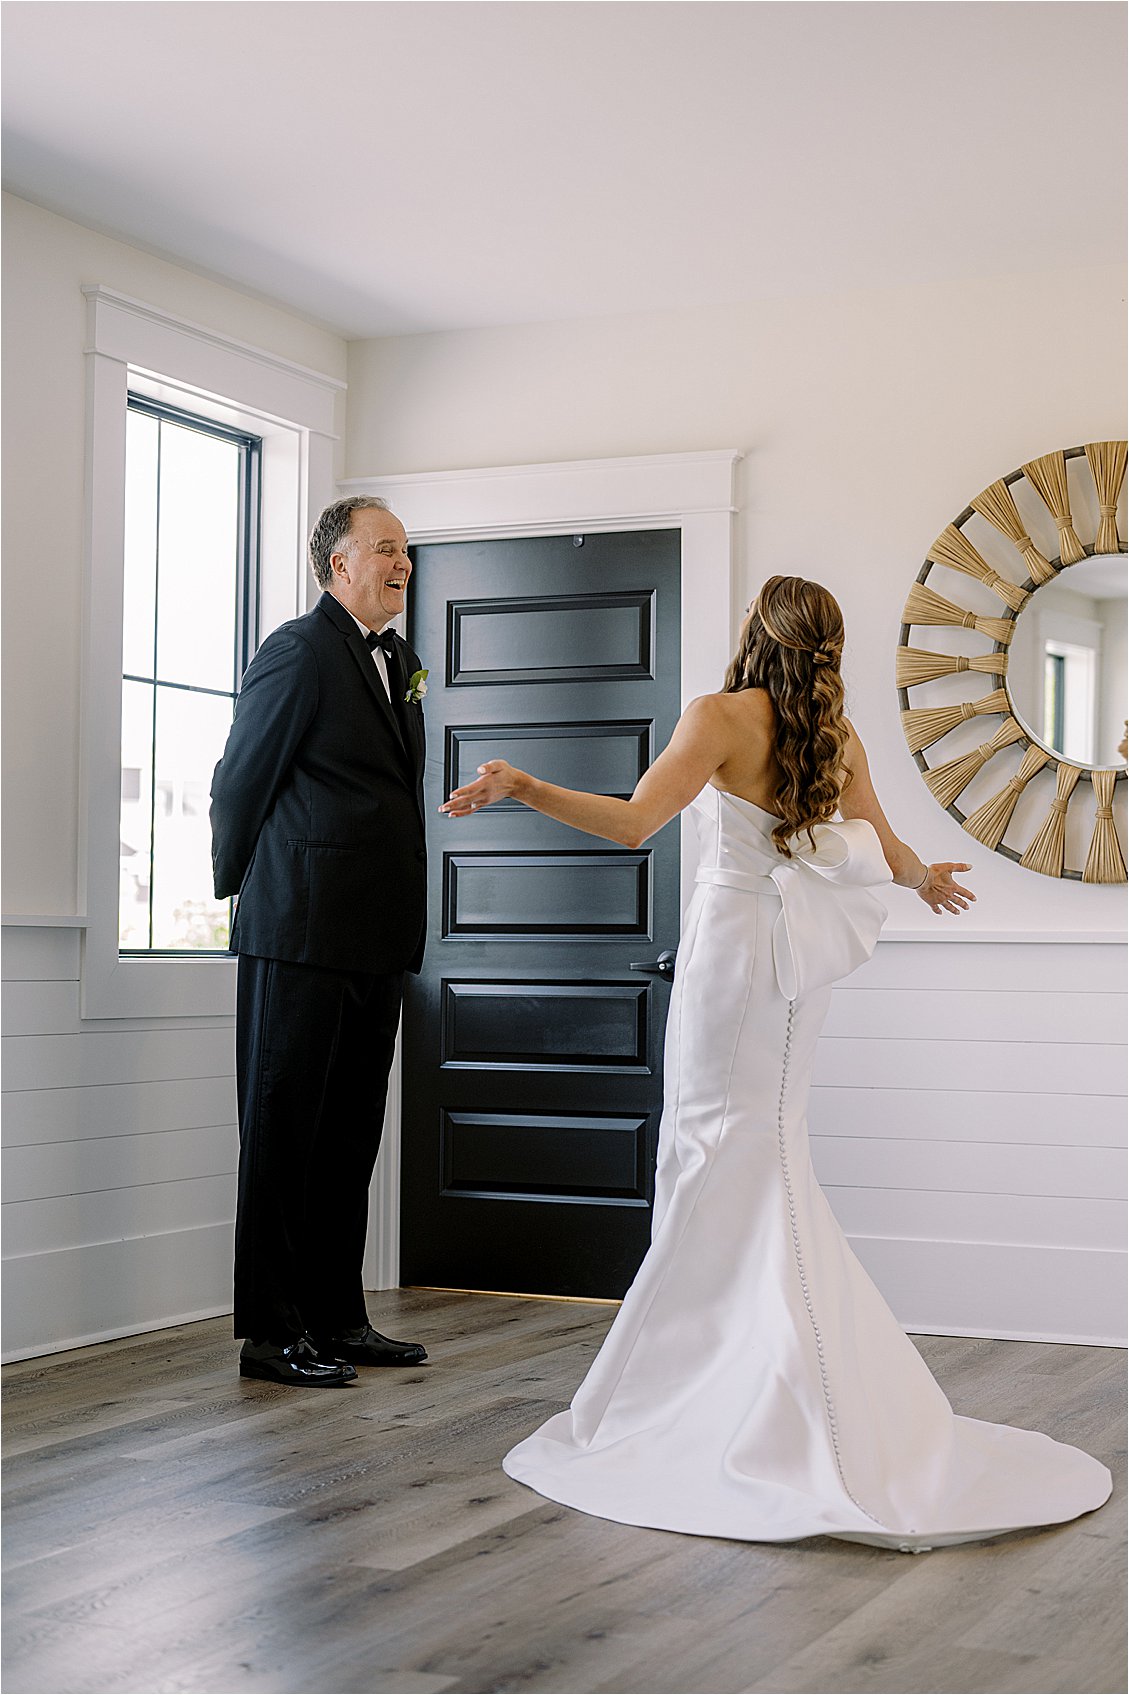 Father-Daughter First Look at Summer Fenwick Island Wedding